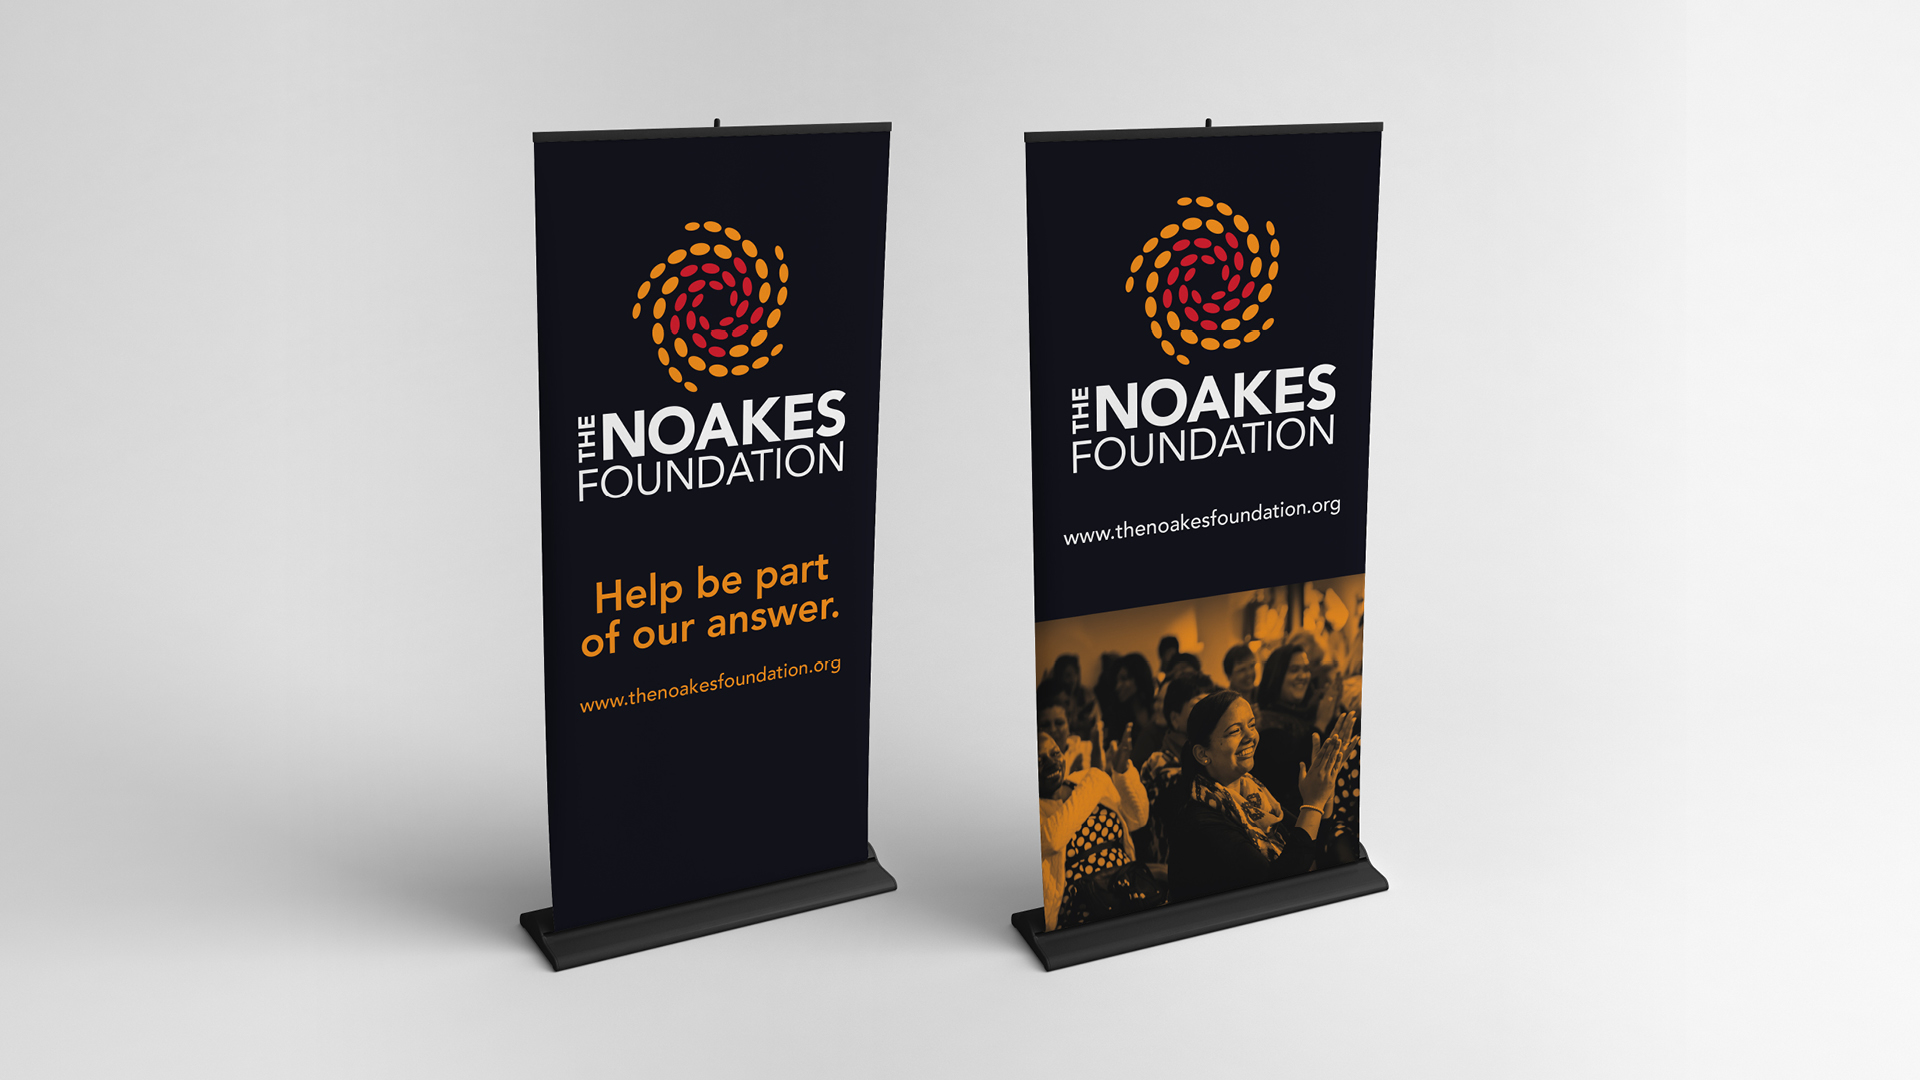 Noakes Foundation brand identity roll-up banners